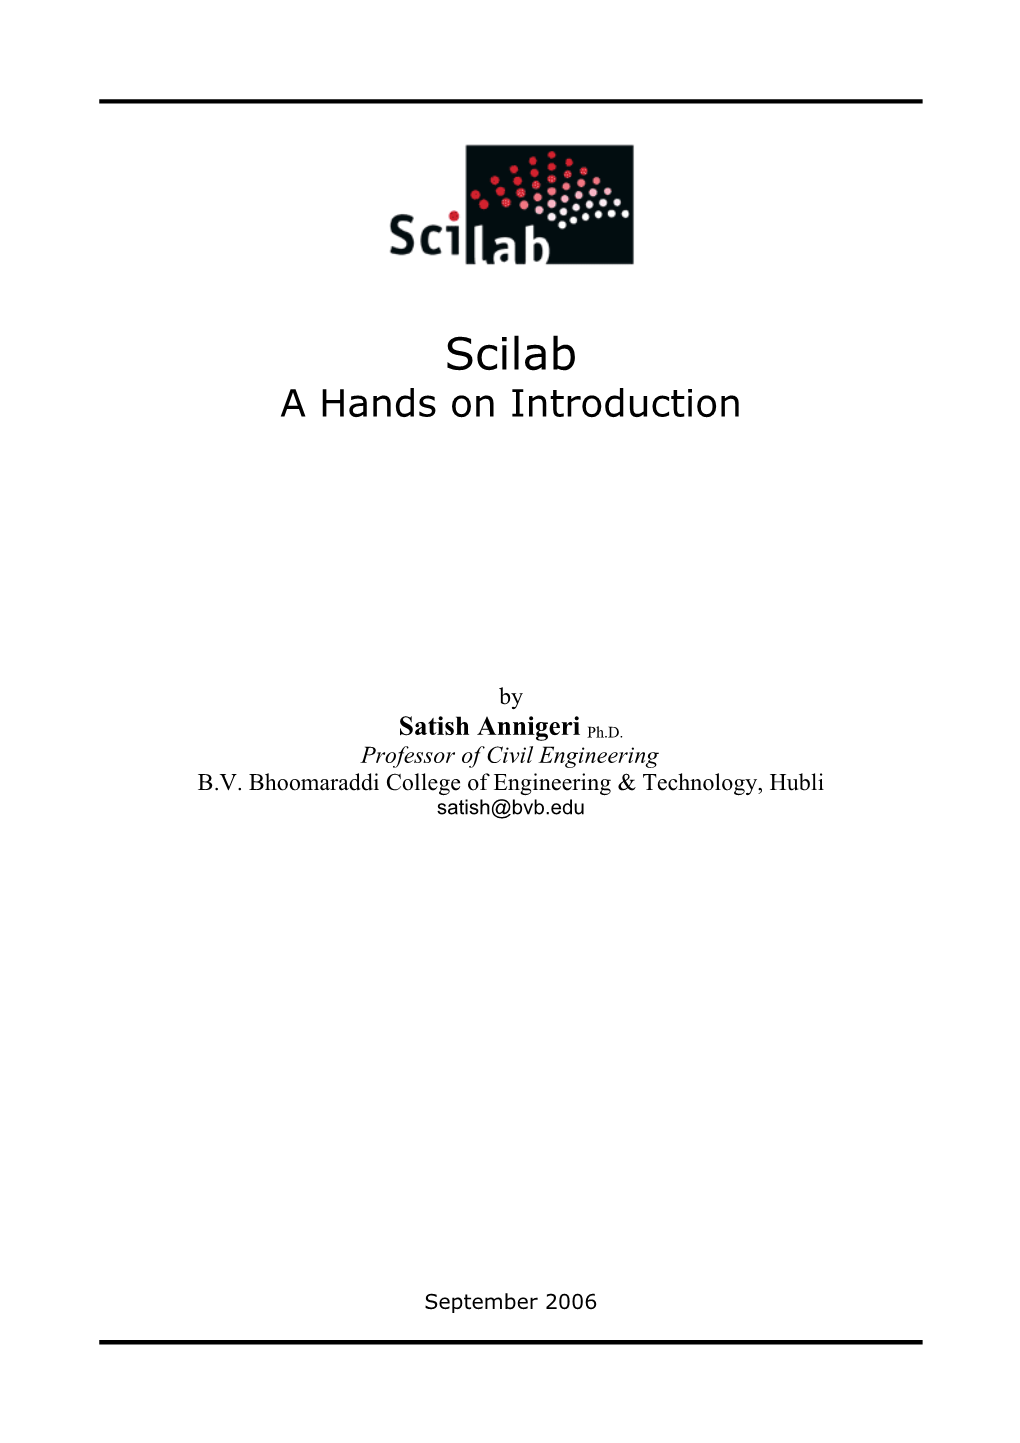 Scilab a Hands on Introduction